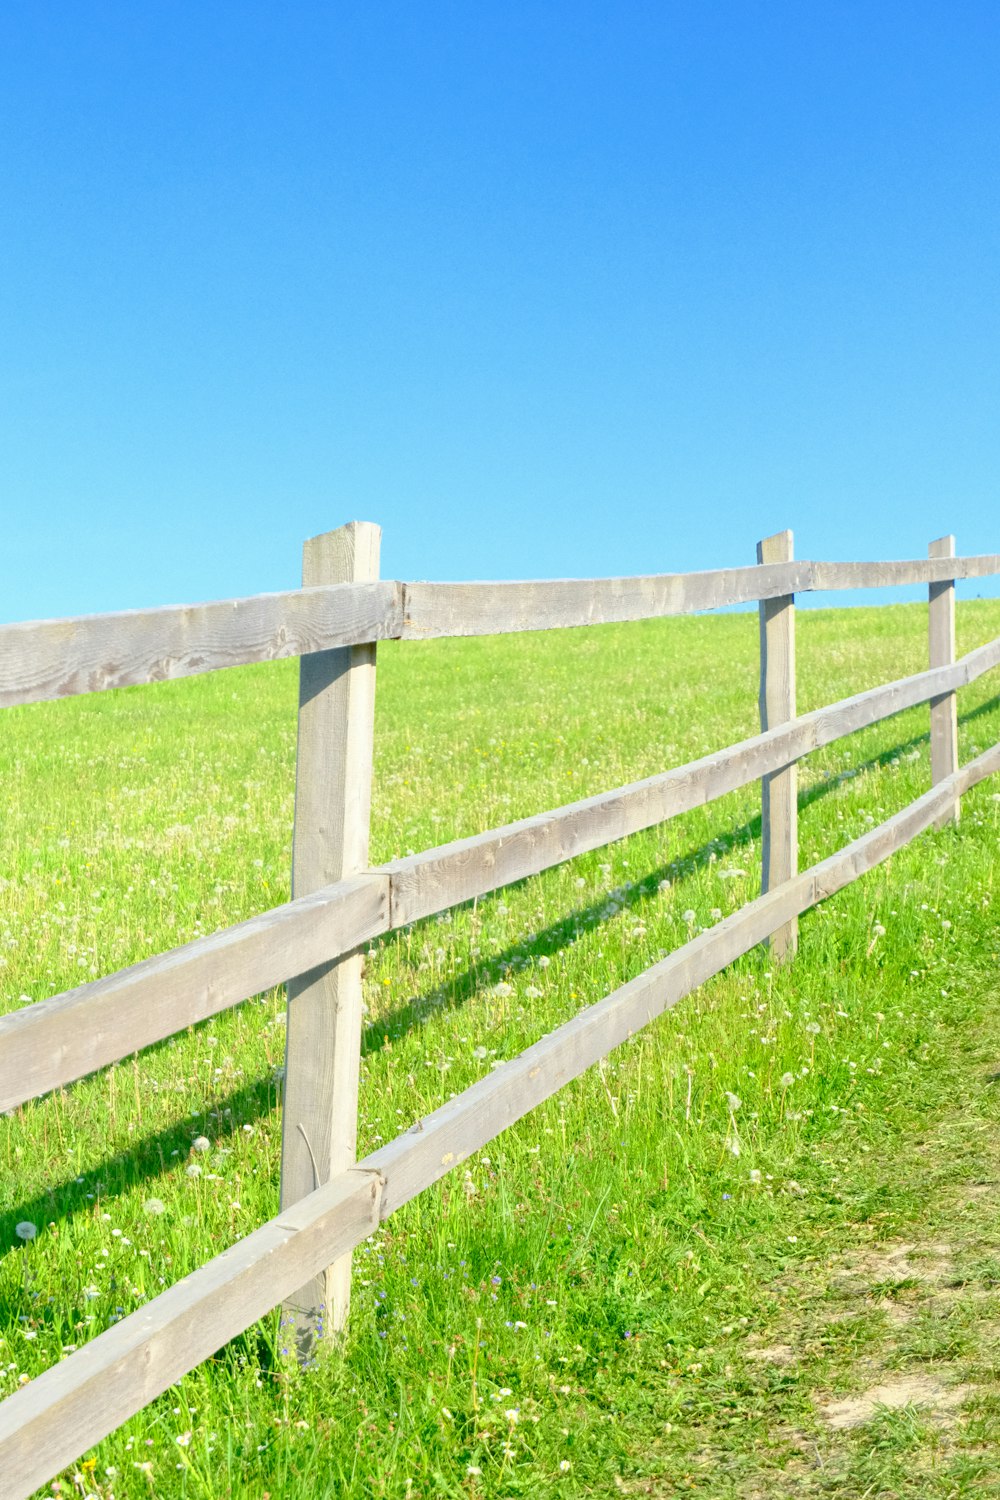 a wooden fence in the middle of a grassy field